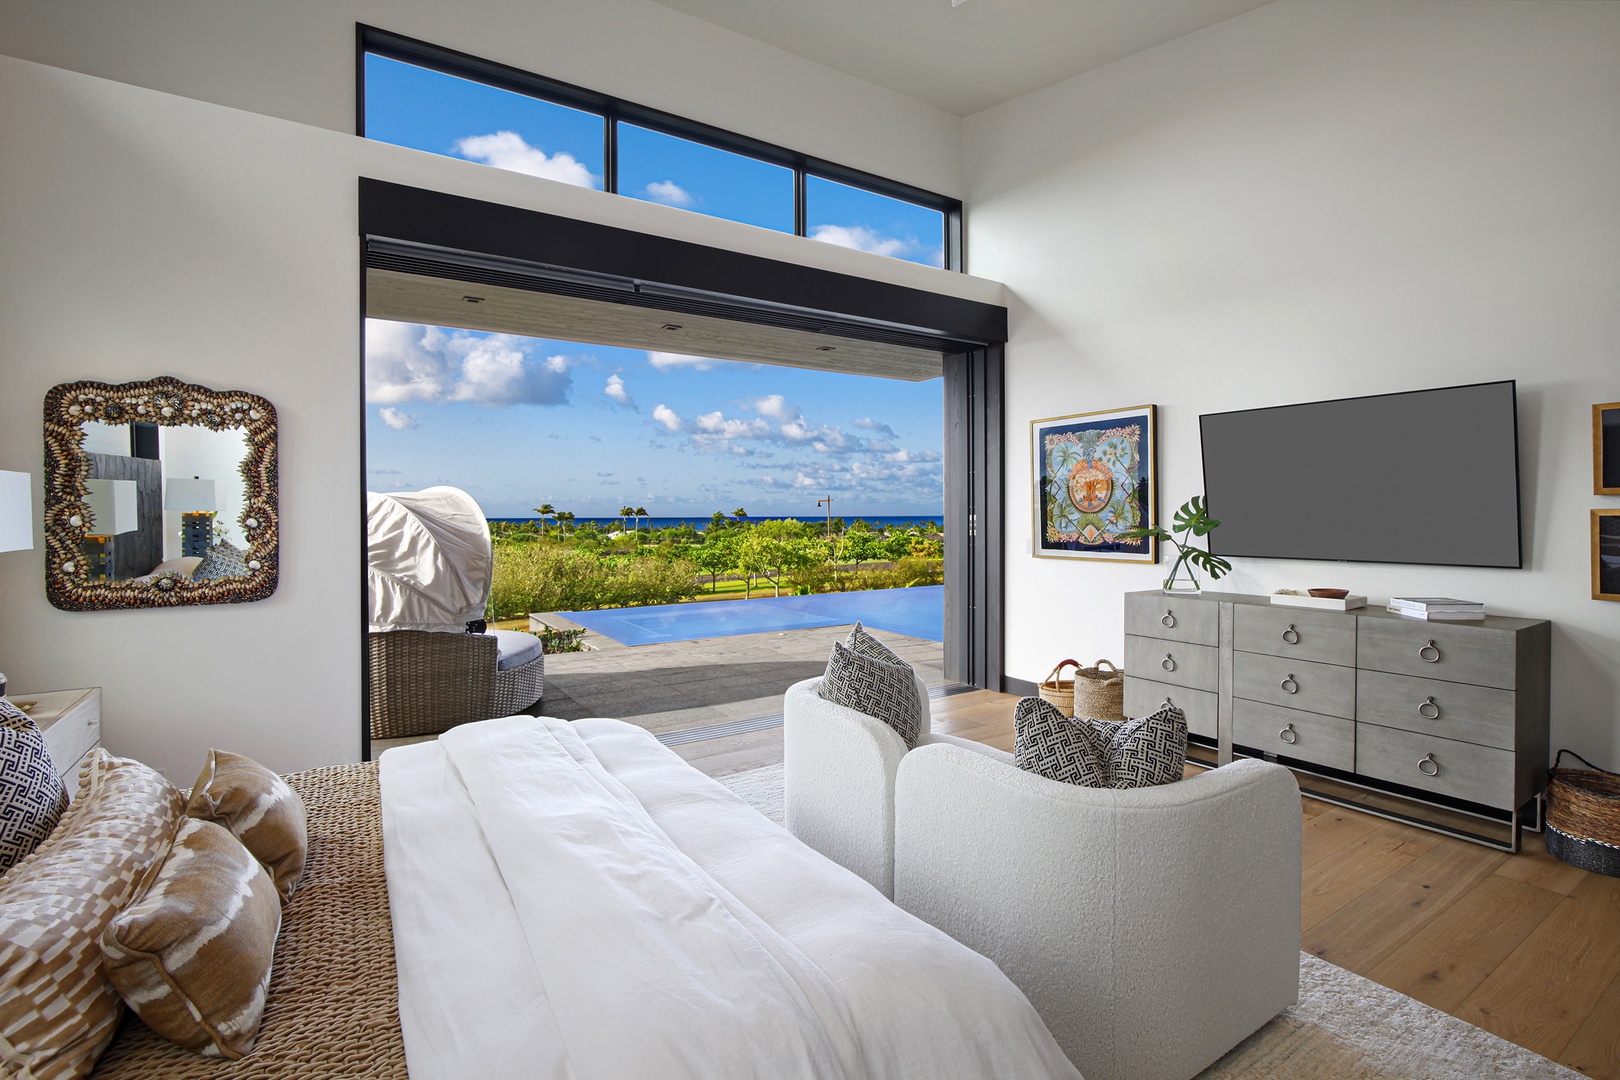 Koloa Vacation Rentals, Hale Mahina Hou - Cozy up and soak in the stunning scenery from the comfort of your own bed.